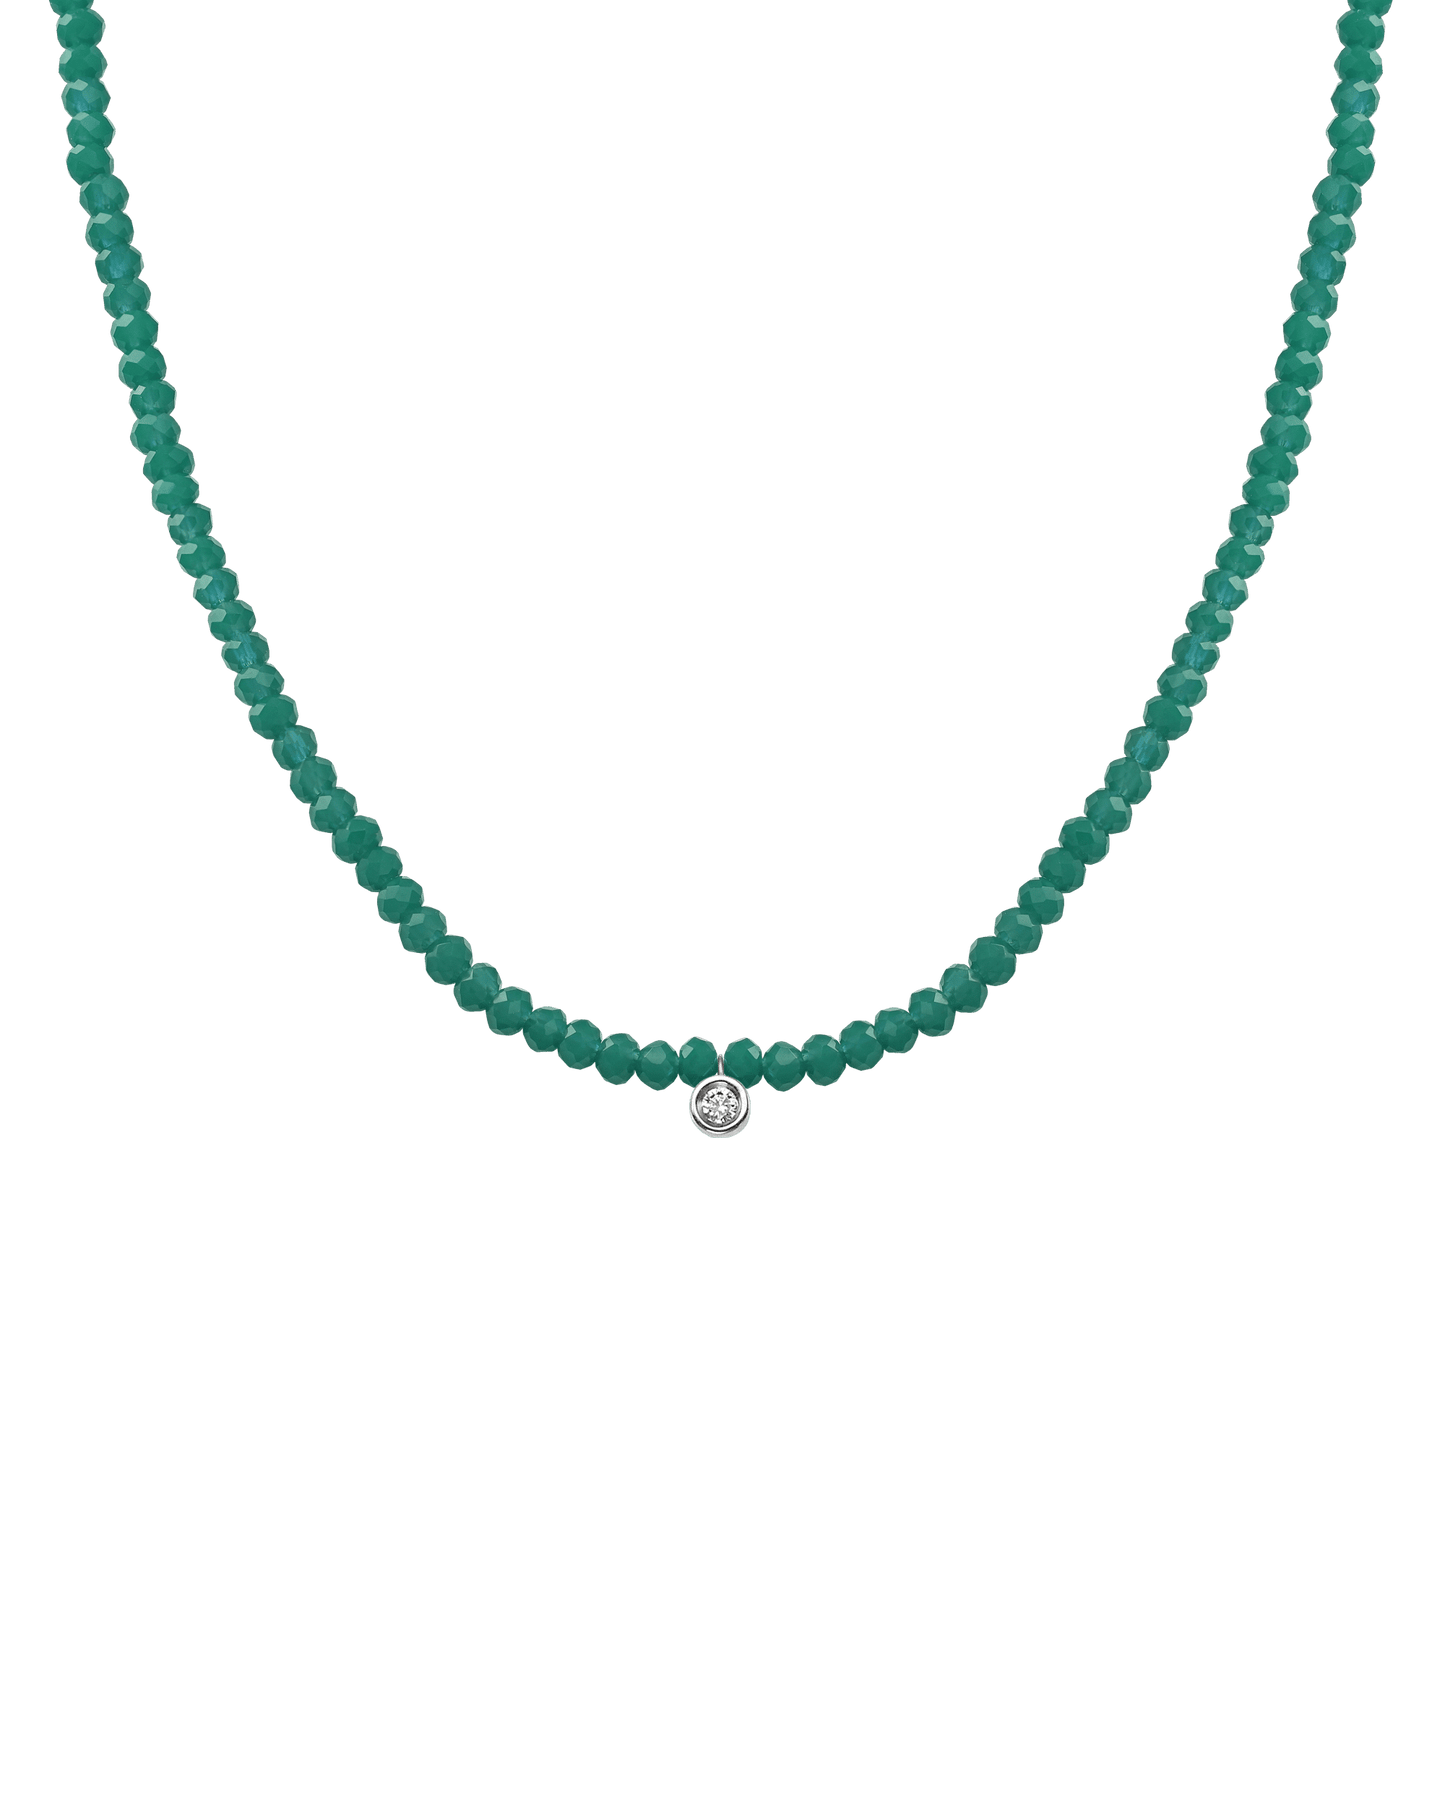 The Gemstone & Diamond Necklace - 14K White Gold Necklaces 14K Solid Gold Natural Emerald Small: 0.03ct 14"